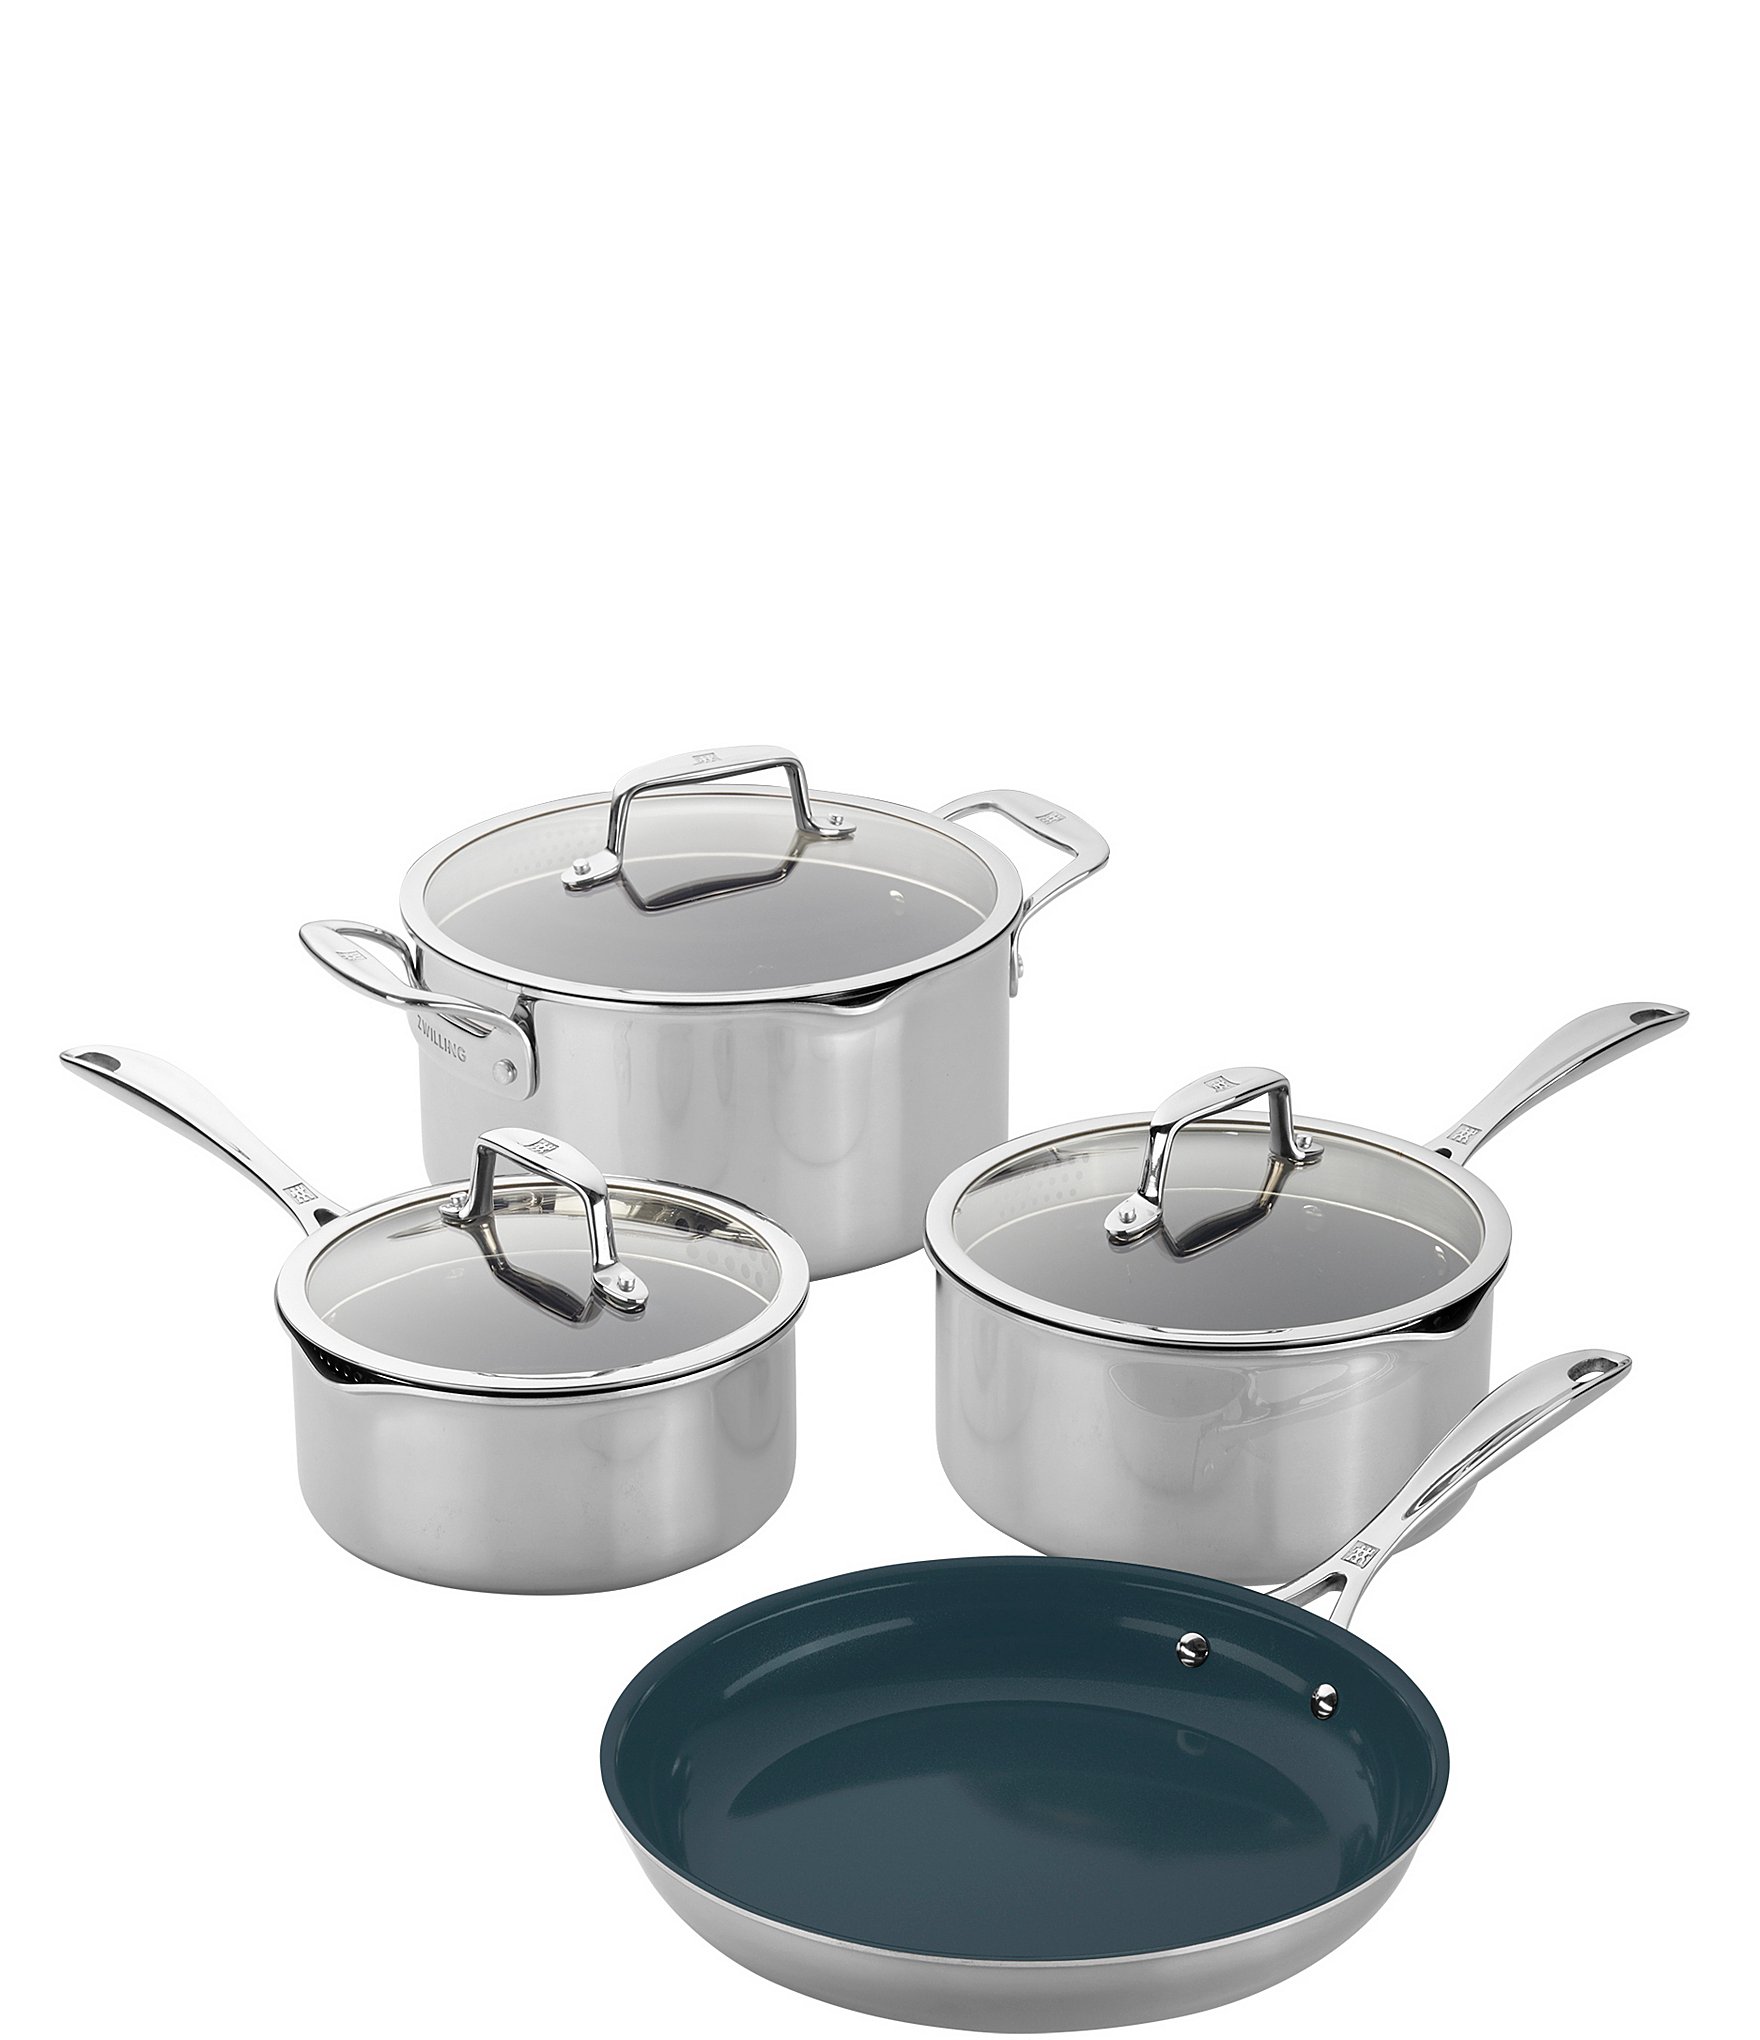 ZWILLING Clad CFX 10-pc Stainless Steel Ceramic Nonstick Cookware